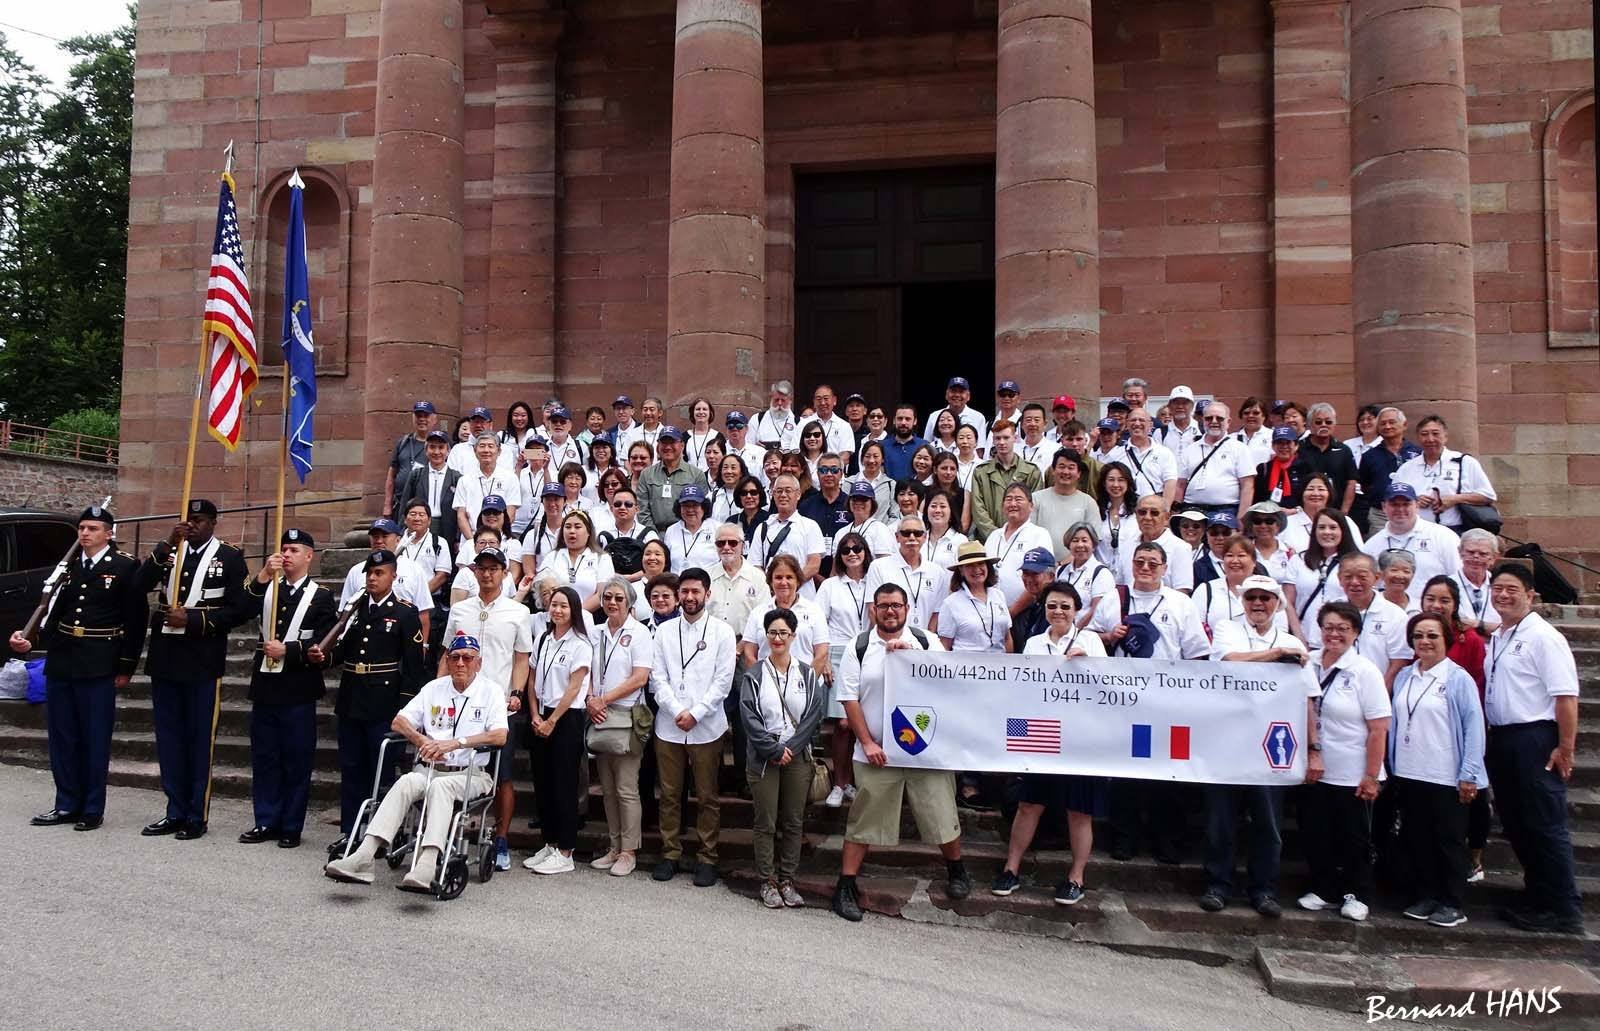 Dr. Yamamoto leads 120 participants to France for the 75th Anniversary of WWII.